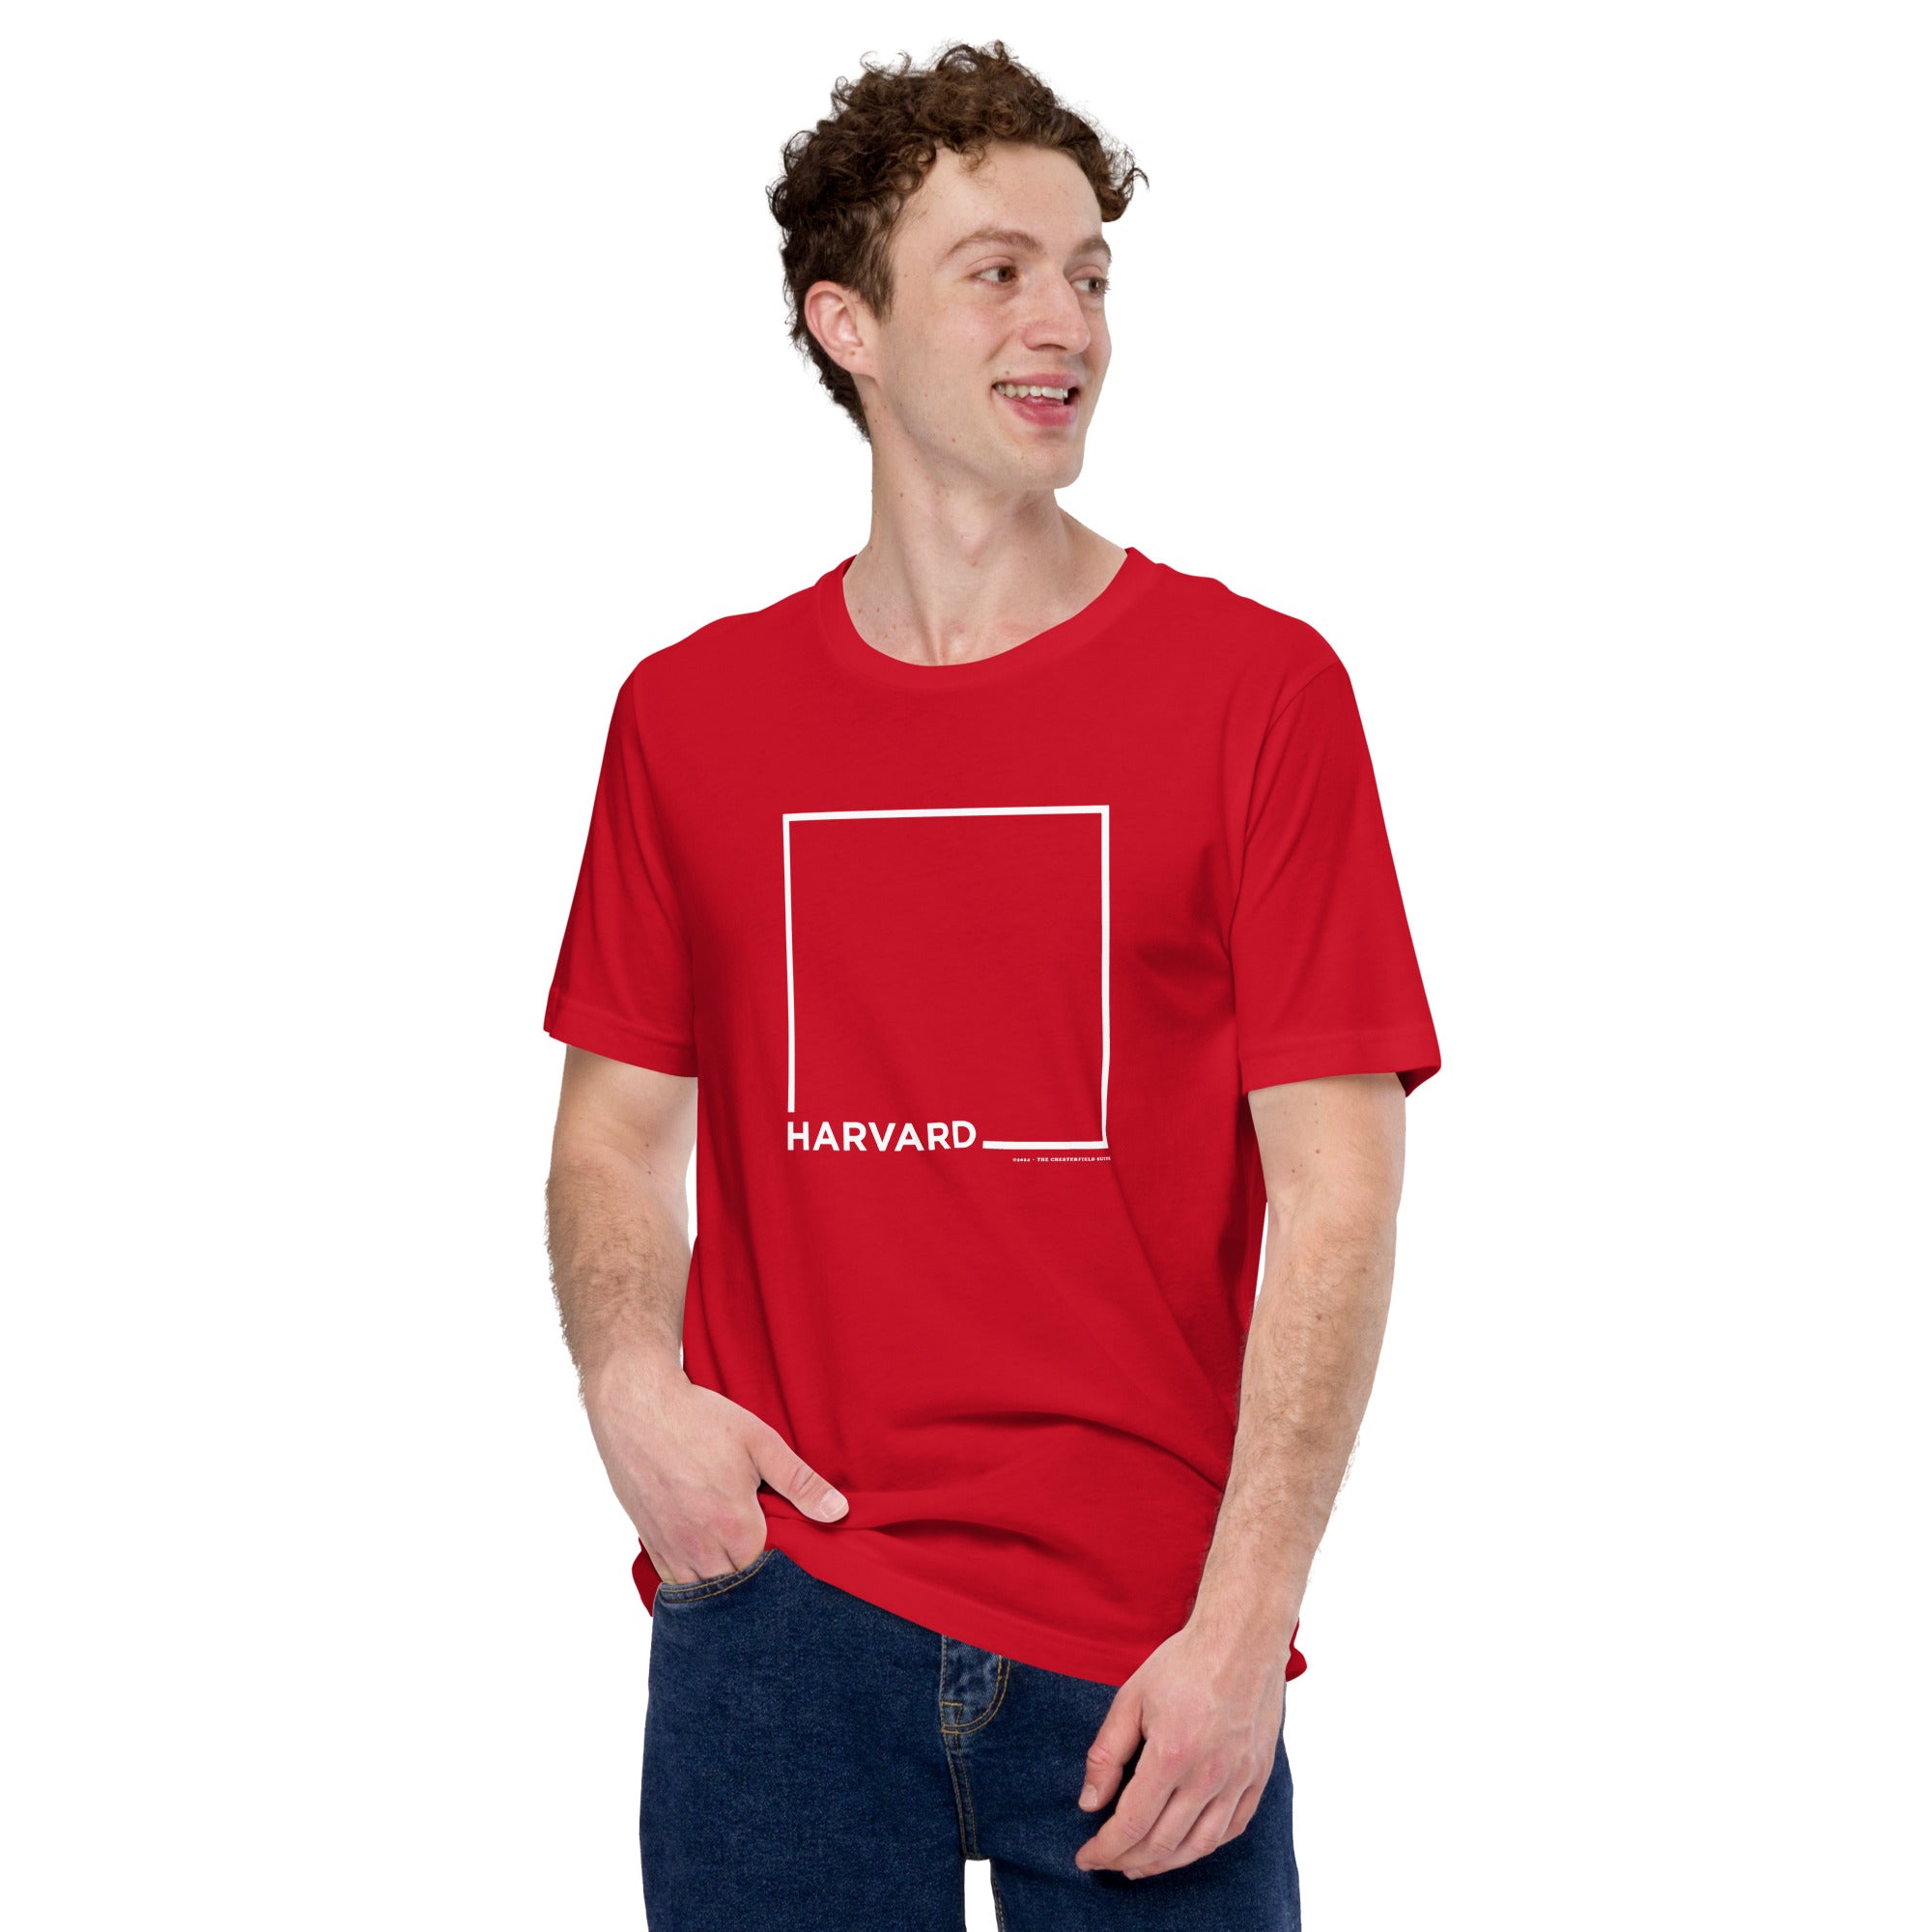 man wearing Red unisex t-shirt with the word Harvard and a white square for harvard square